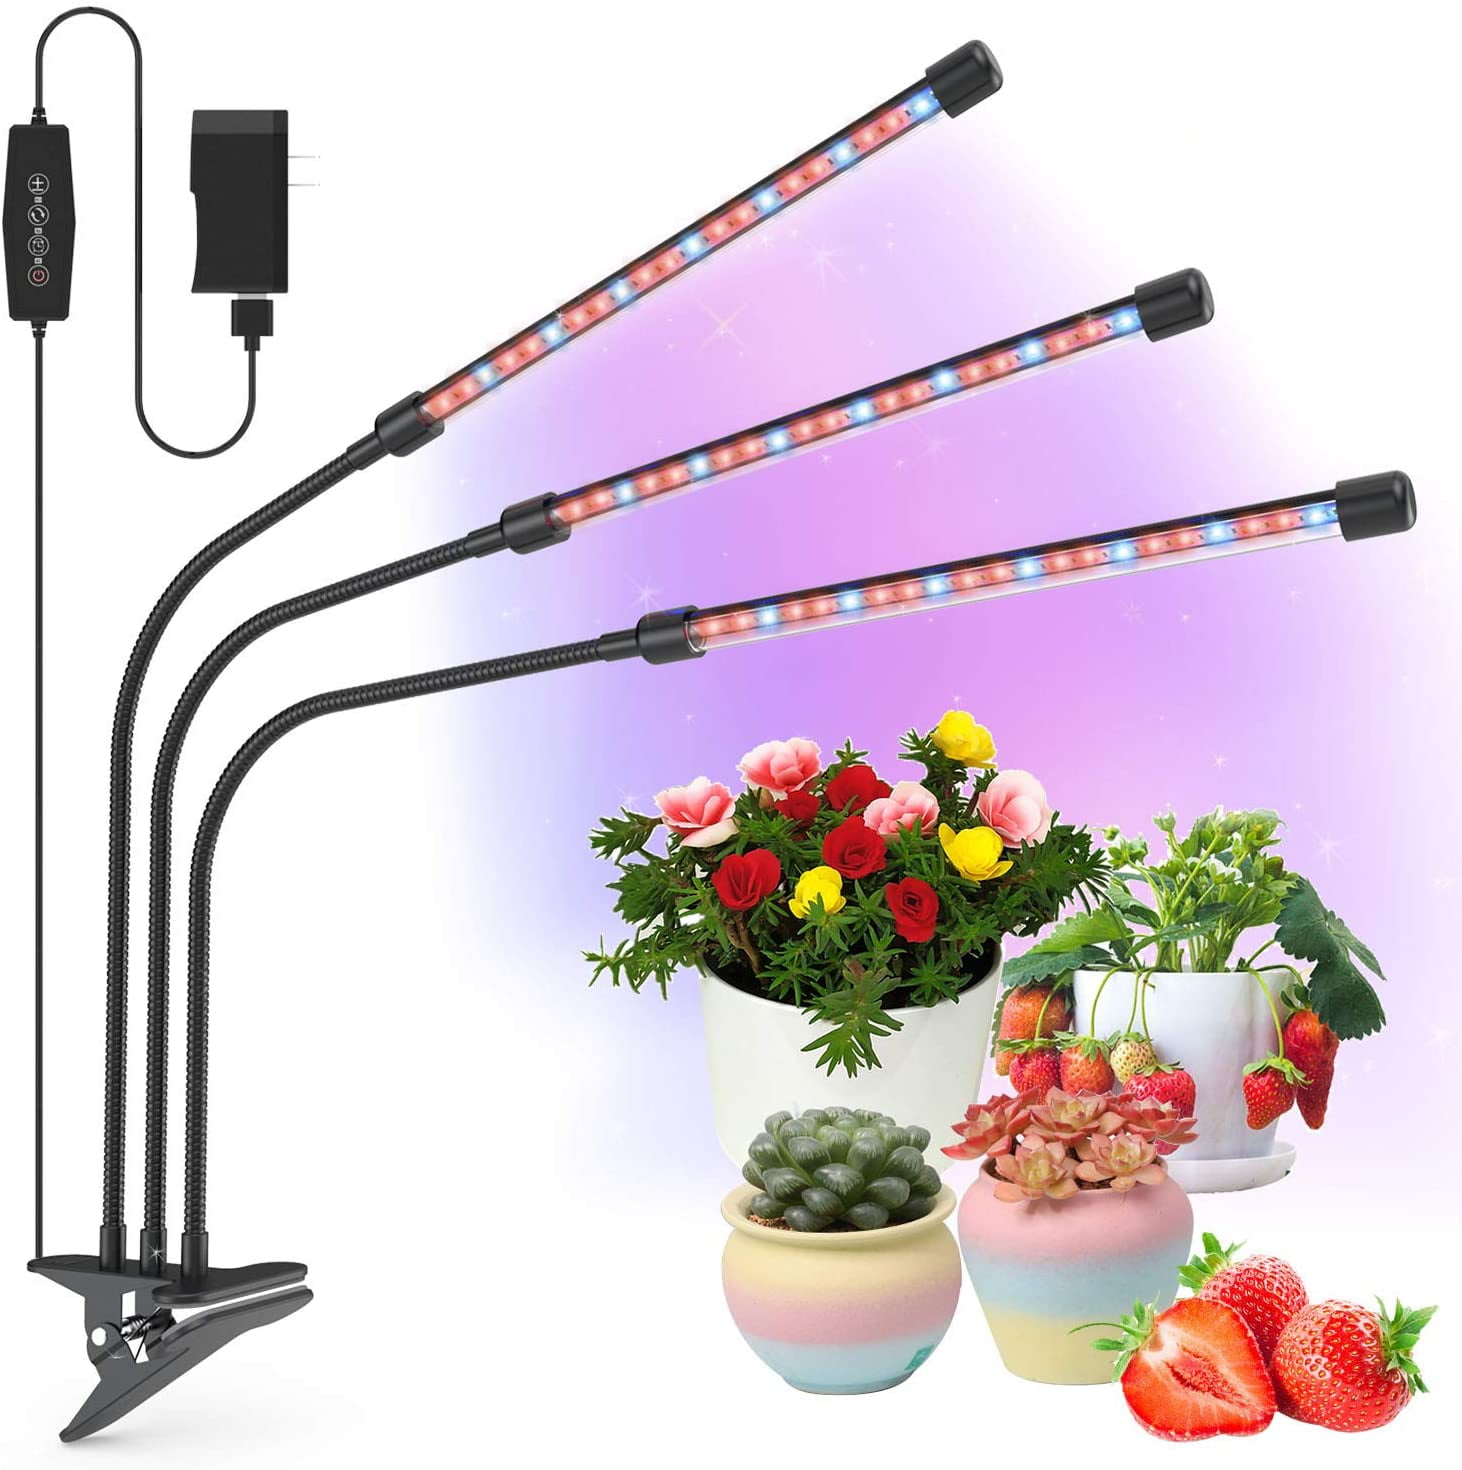 Planter LED Grow Light 5 Dimmable Level USB Succulent Indoor Hydroponic Lamp 